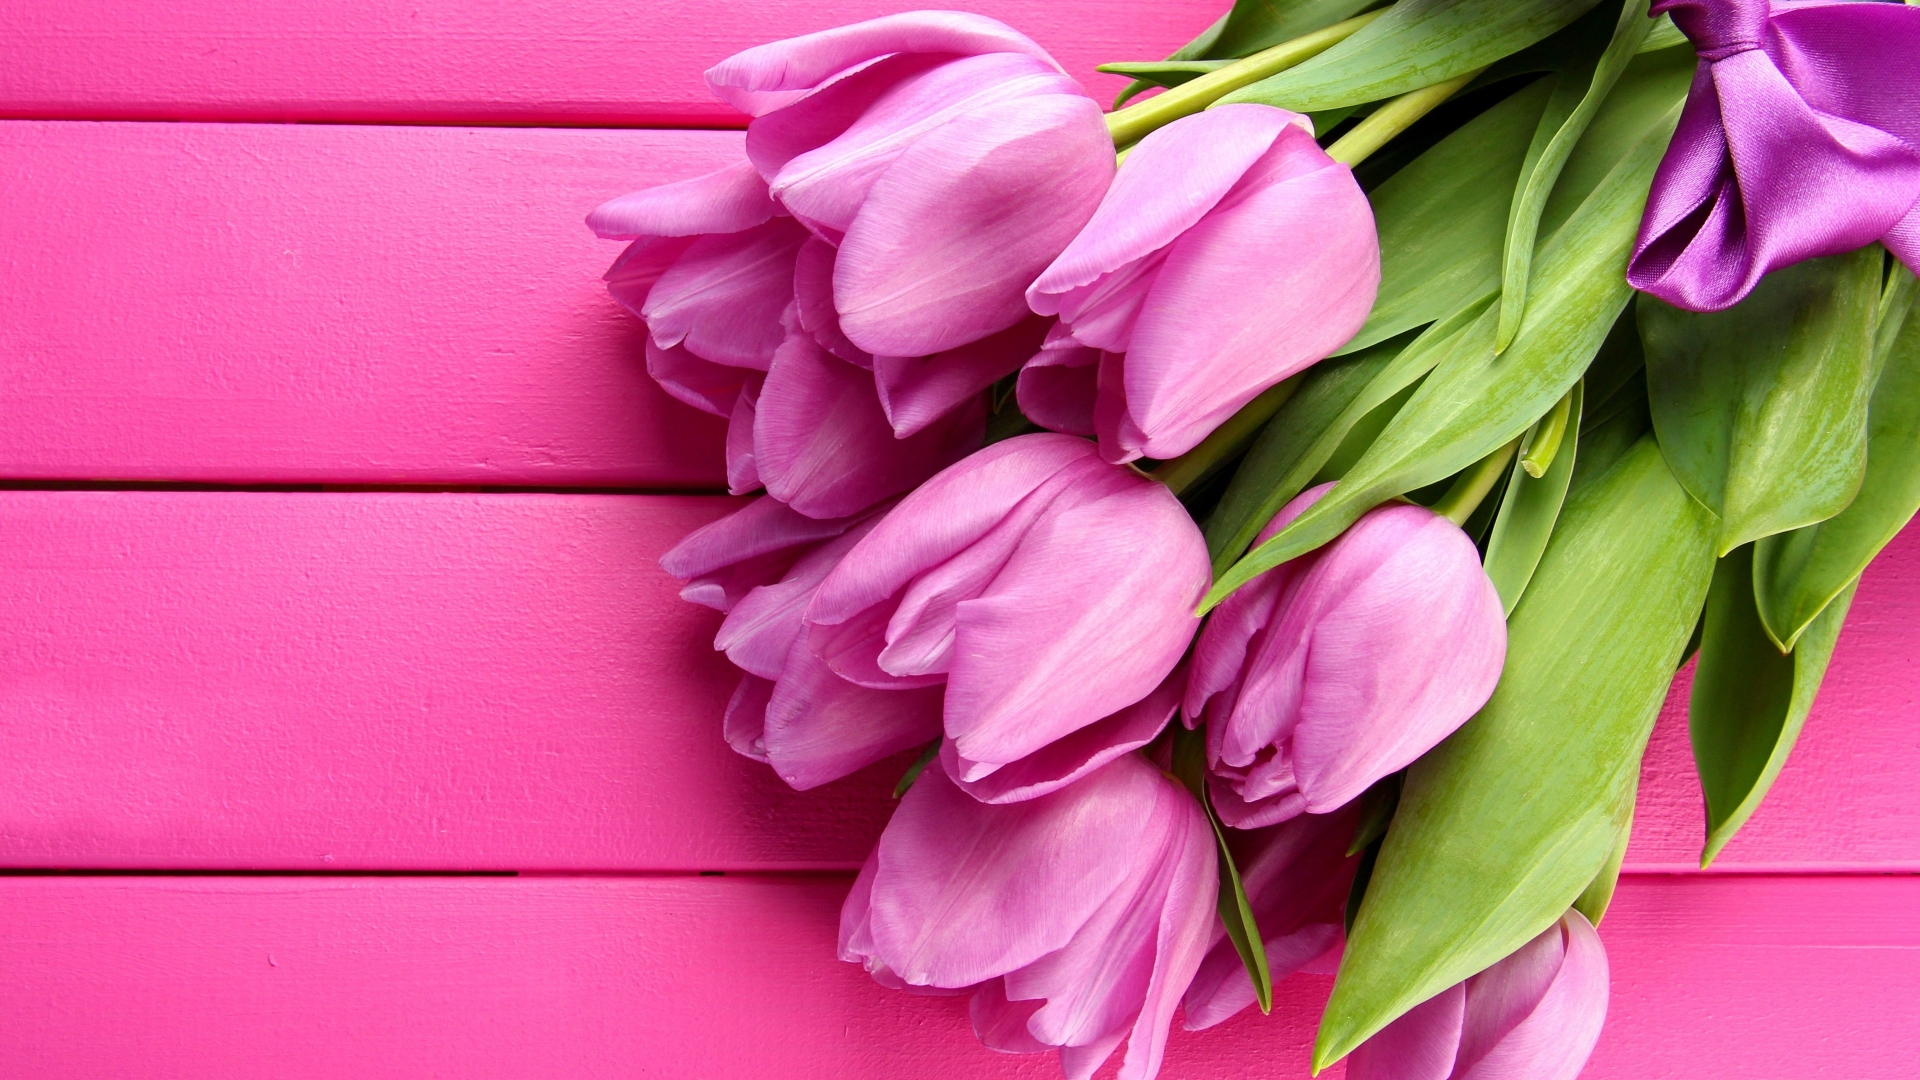 Gorgeous Pink Tulips for 1920 x 1080 HDTV 1080p resolution